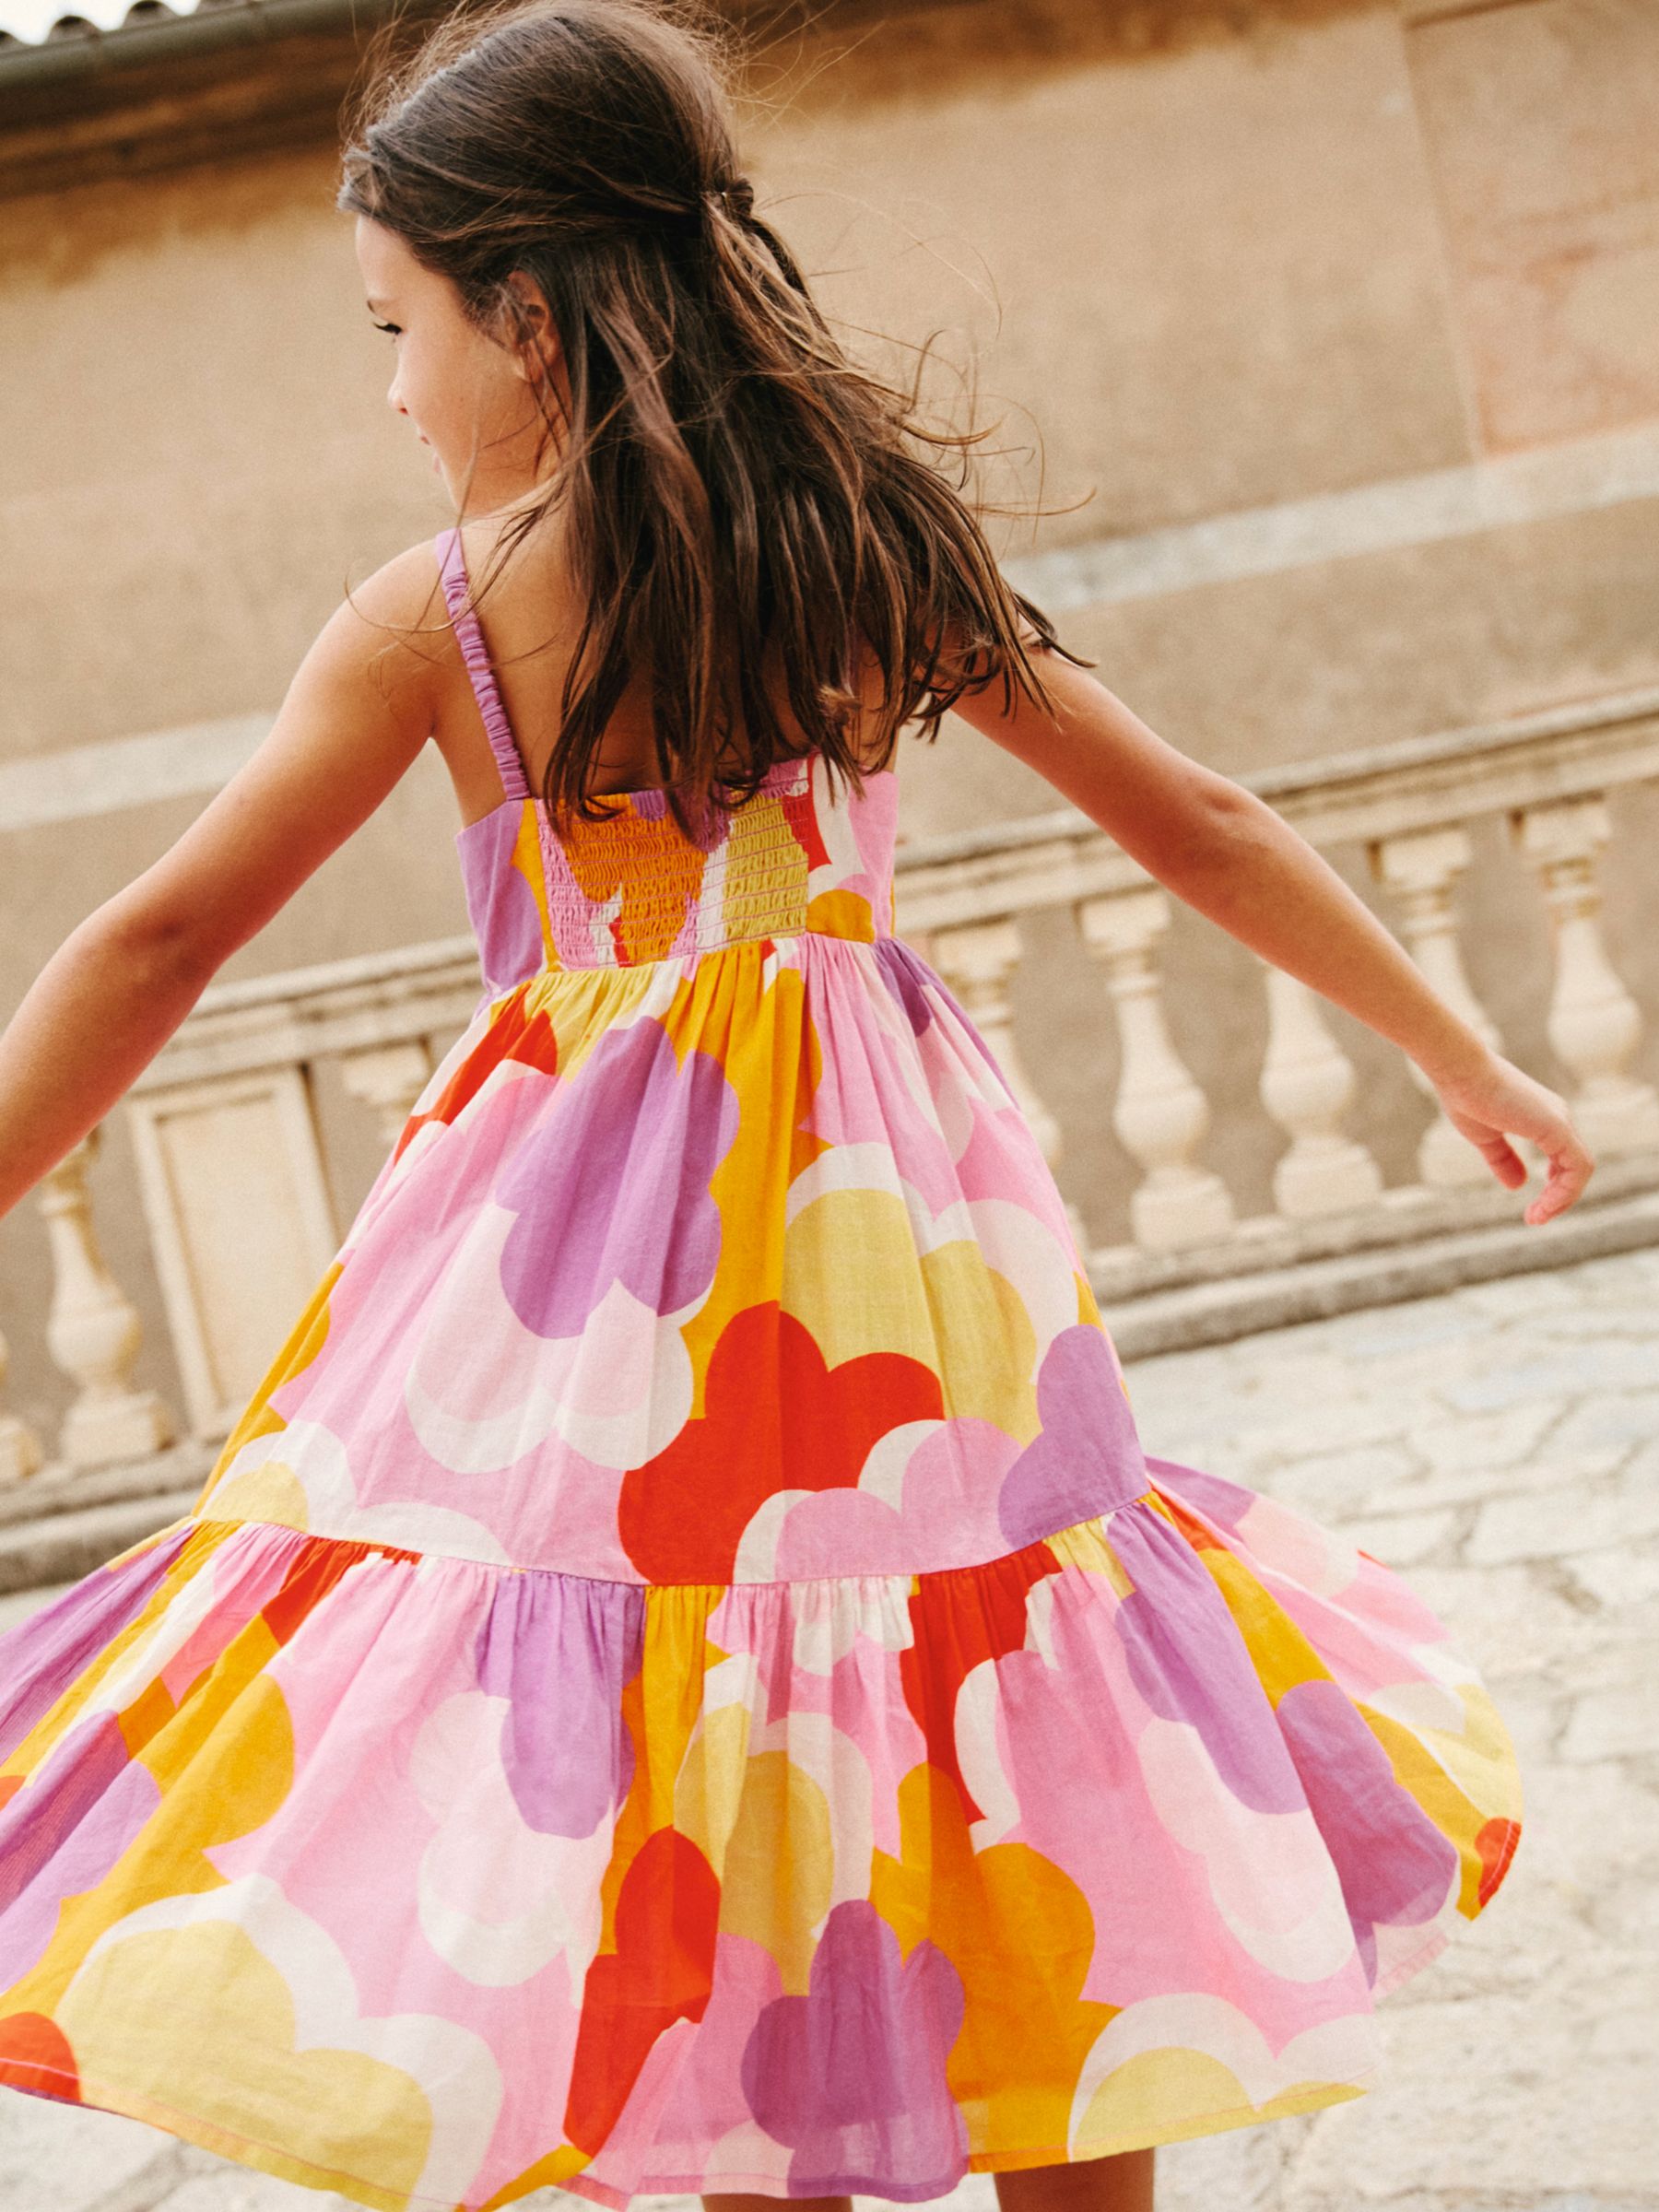 Buy Mini Boden Kids' Floral Print Twirly Tiered Sun Dress, Jam Red Daisy Cloud Online at johnlewis.com